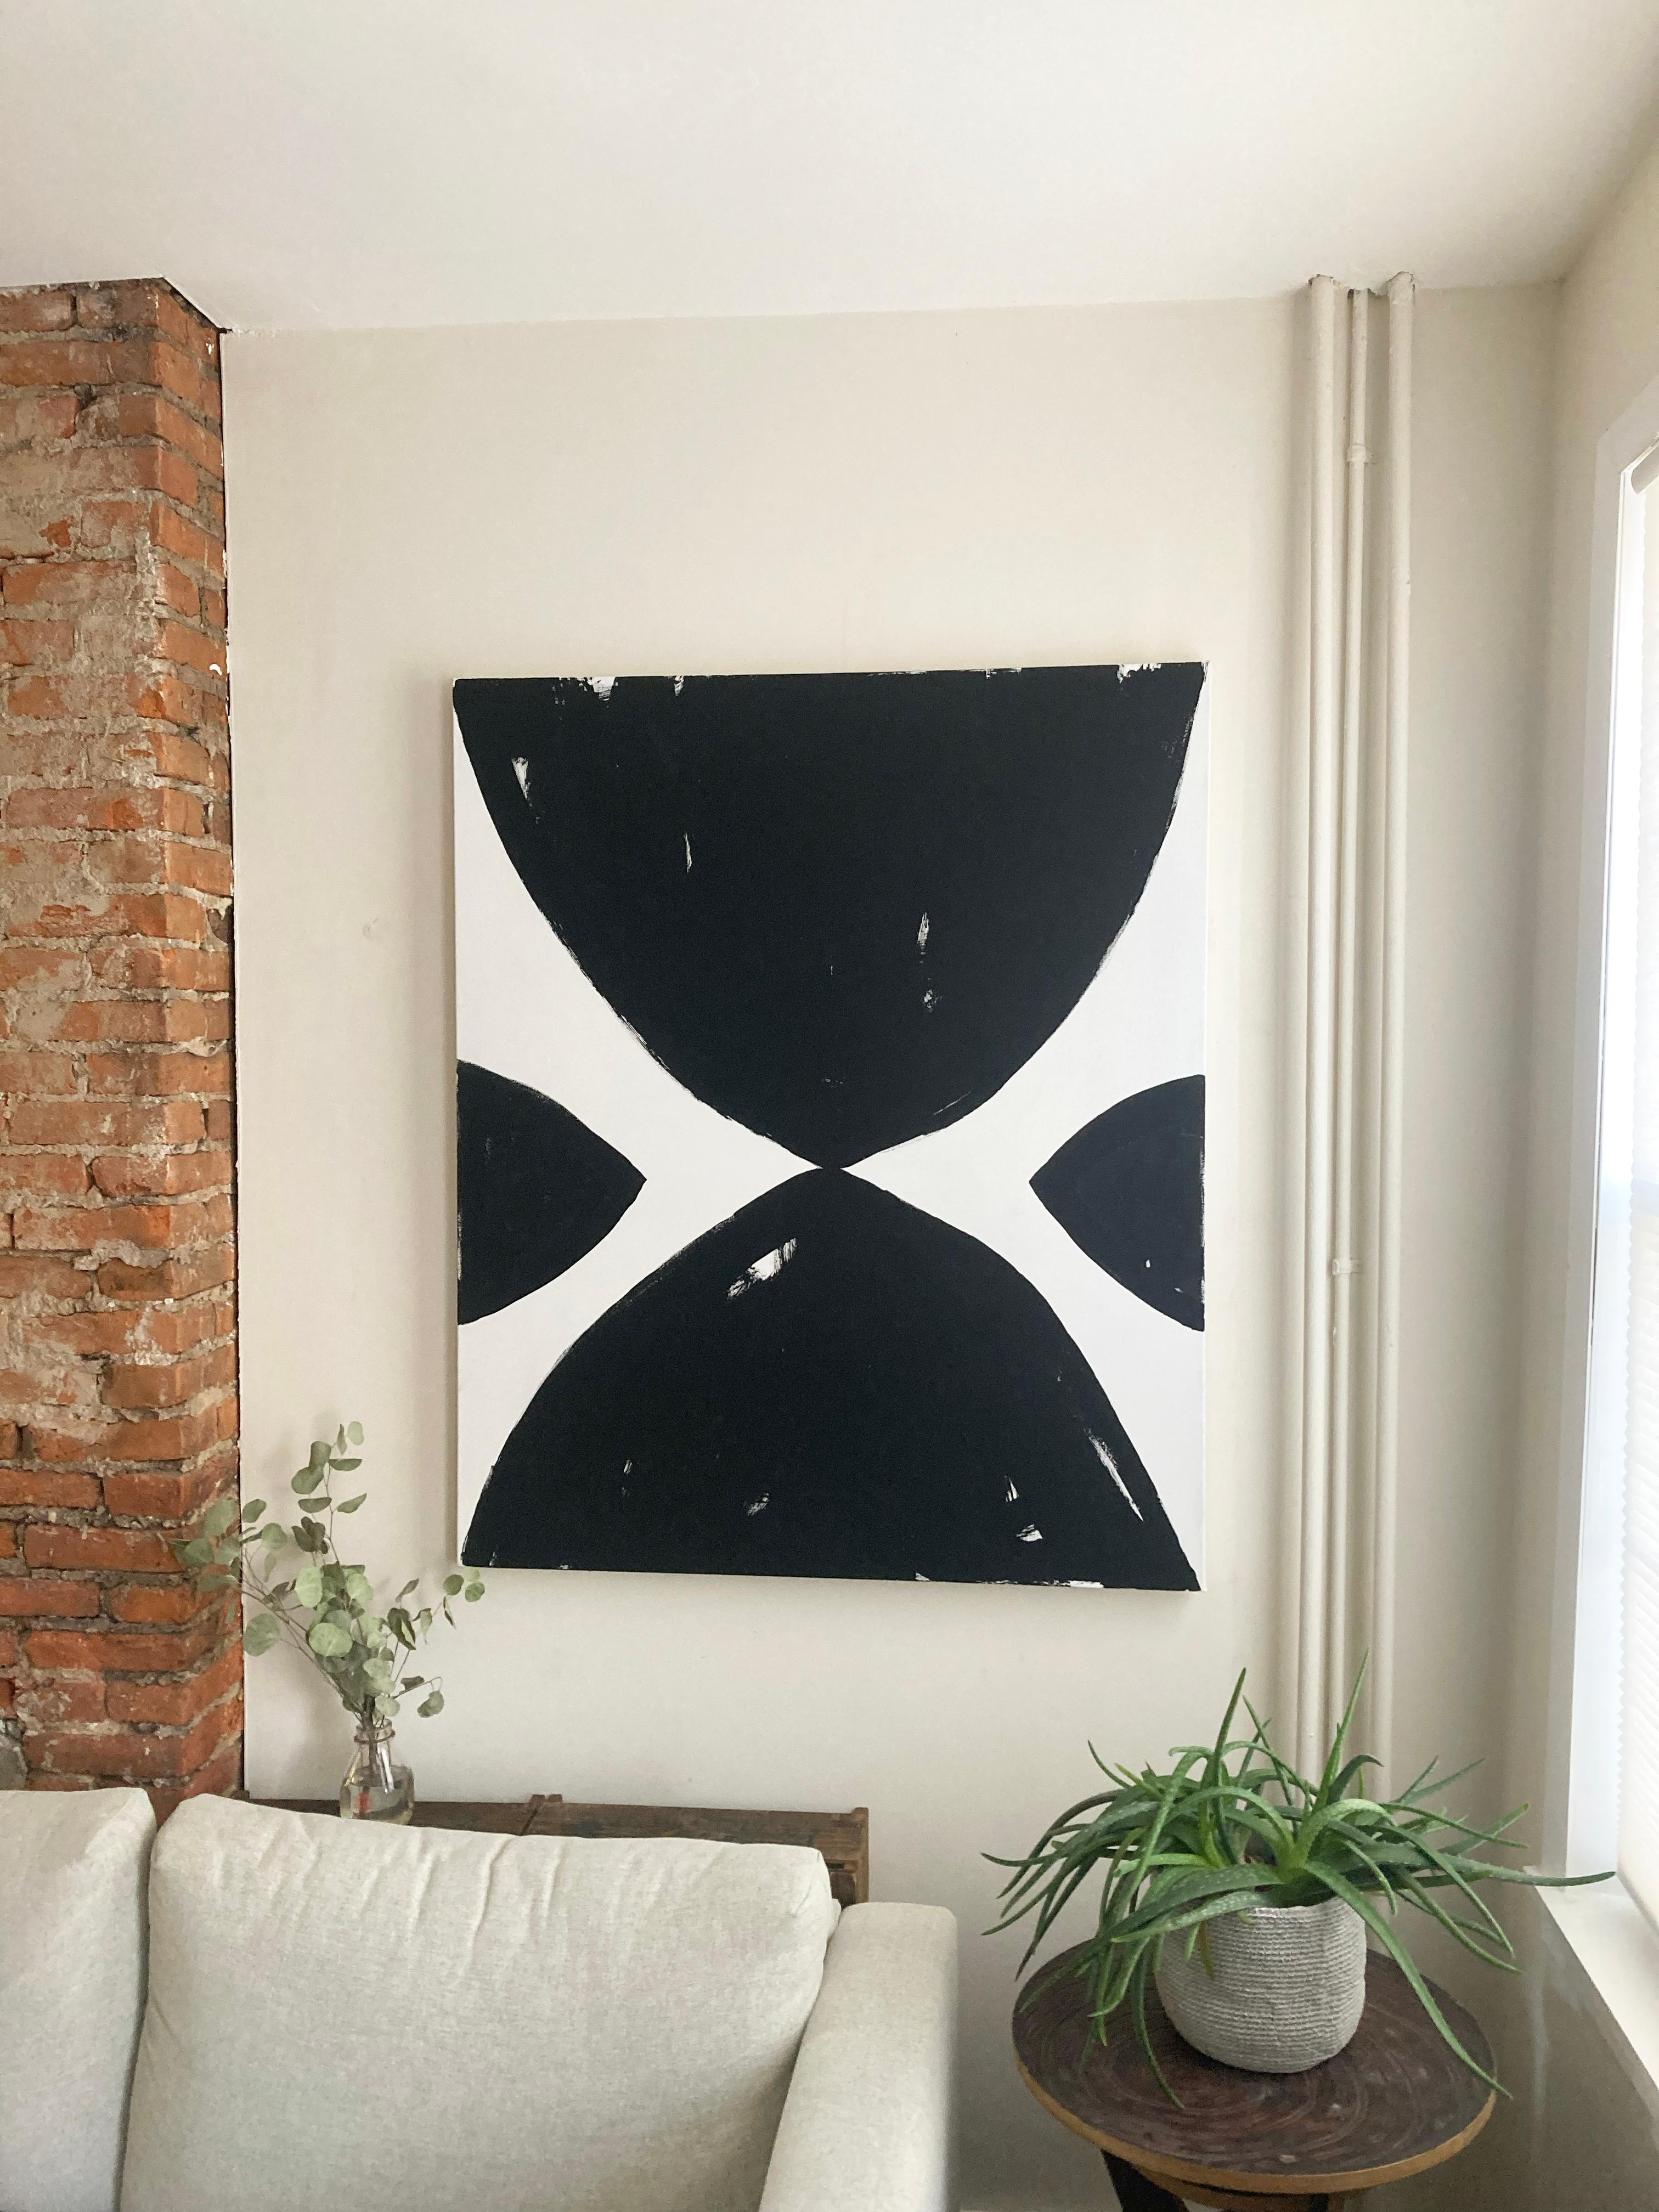 The title String Theory comes from a podcast I happened to be listening to on the universe and string theory during the time of this paintings creation. The painting was executed based off of multiple drawings exploring simple geometric / organic